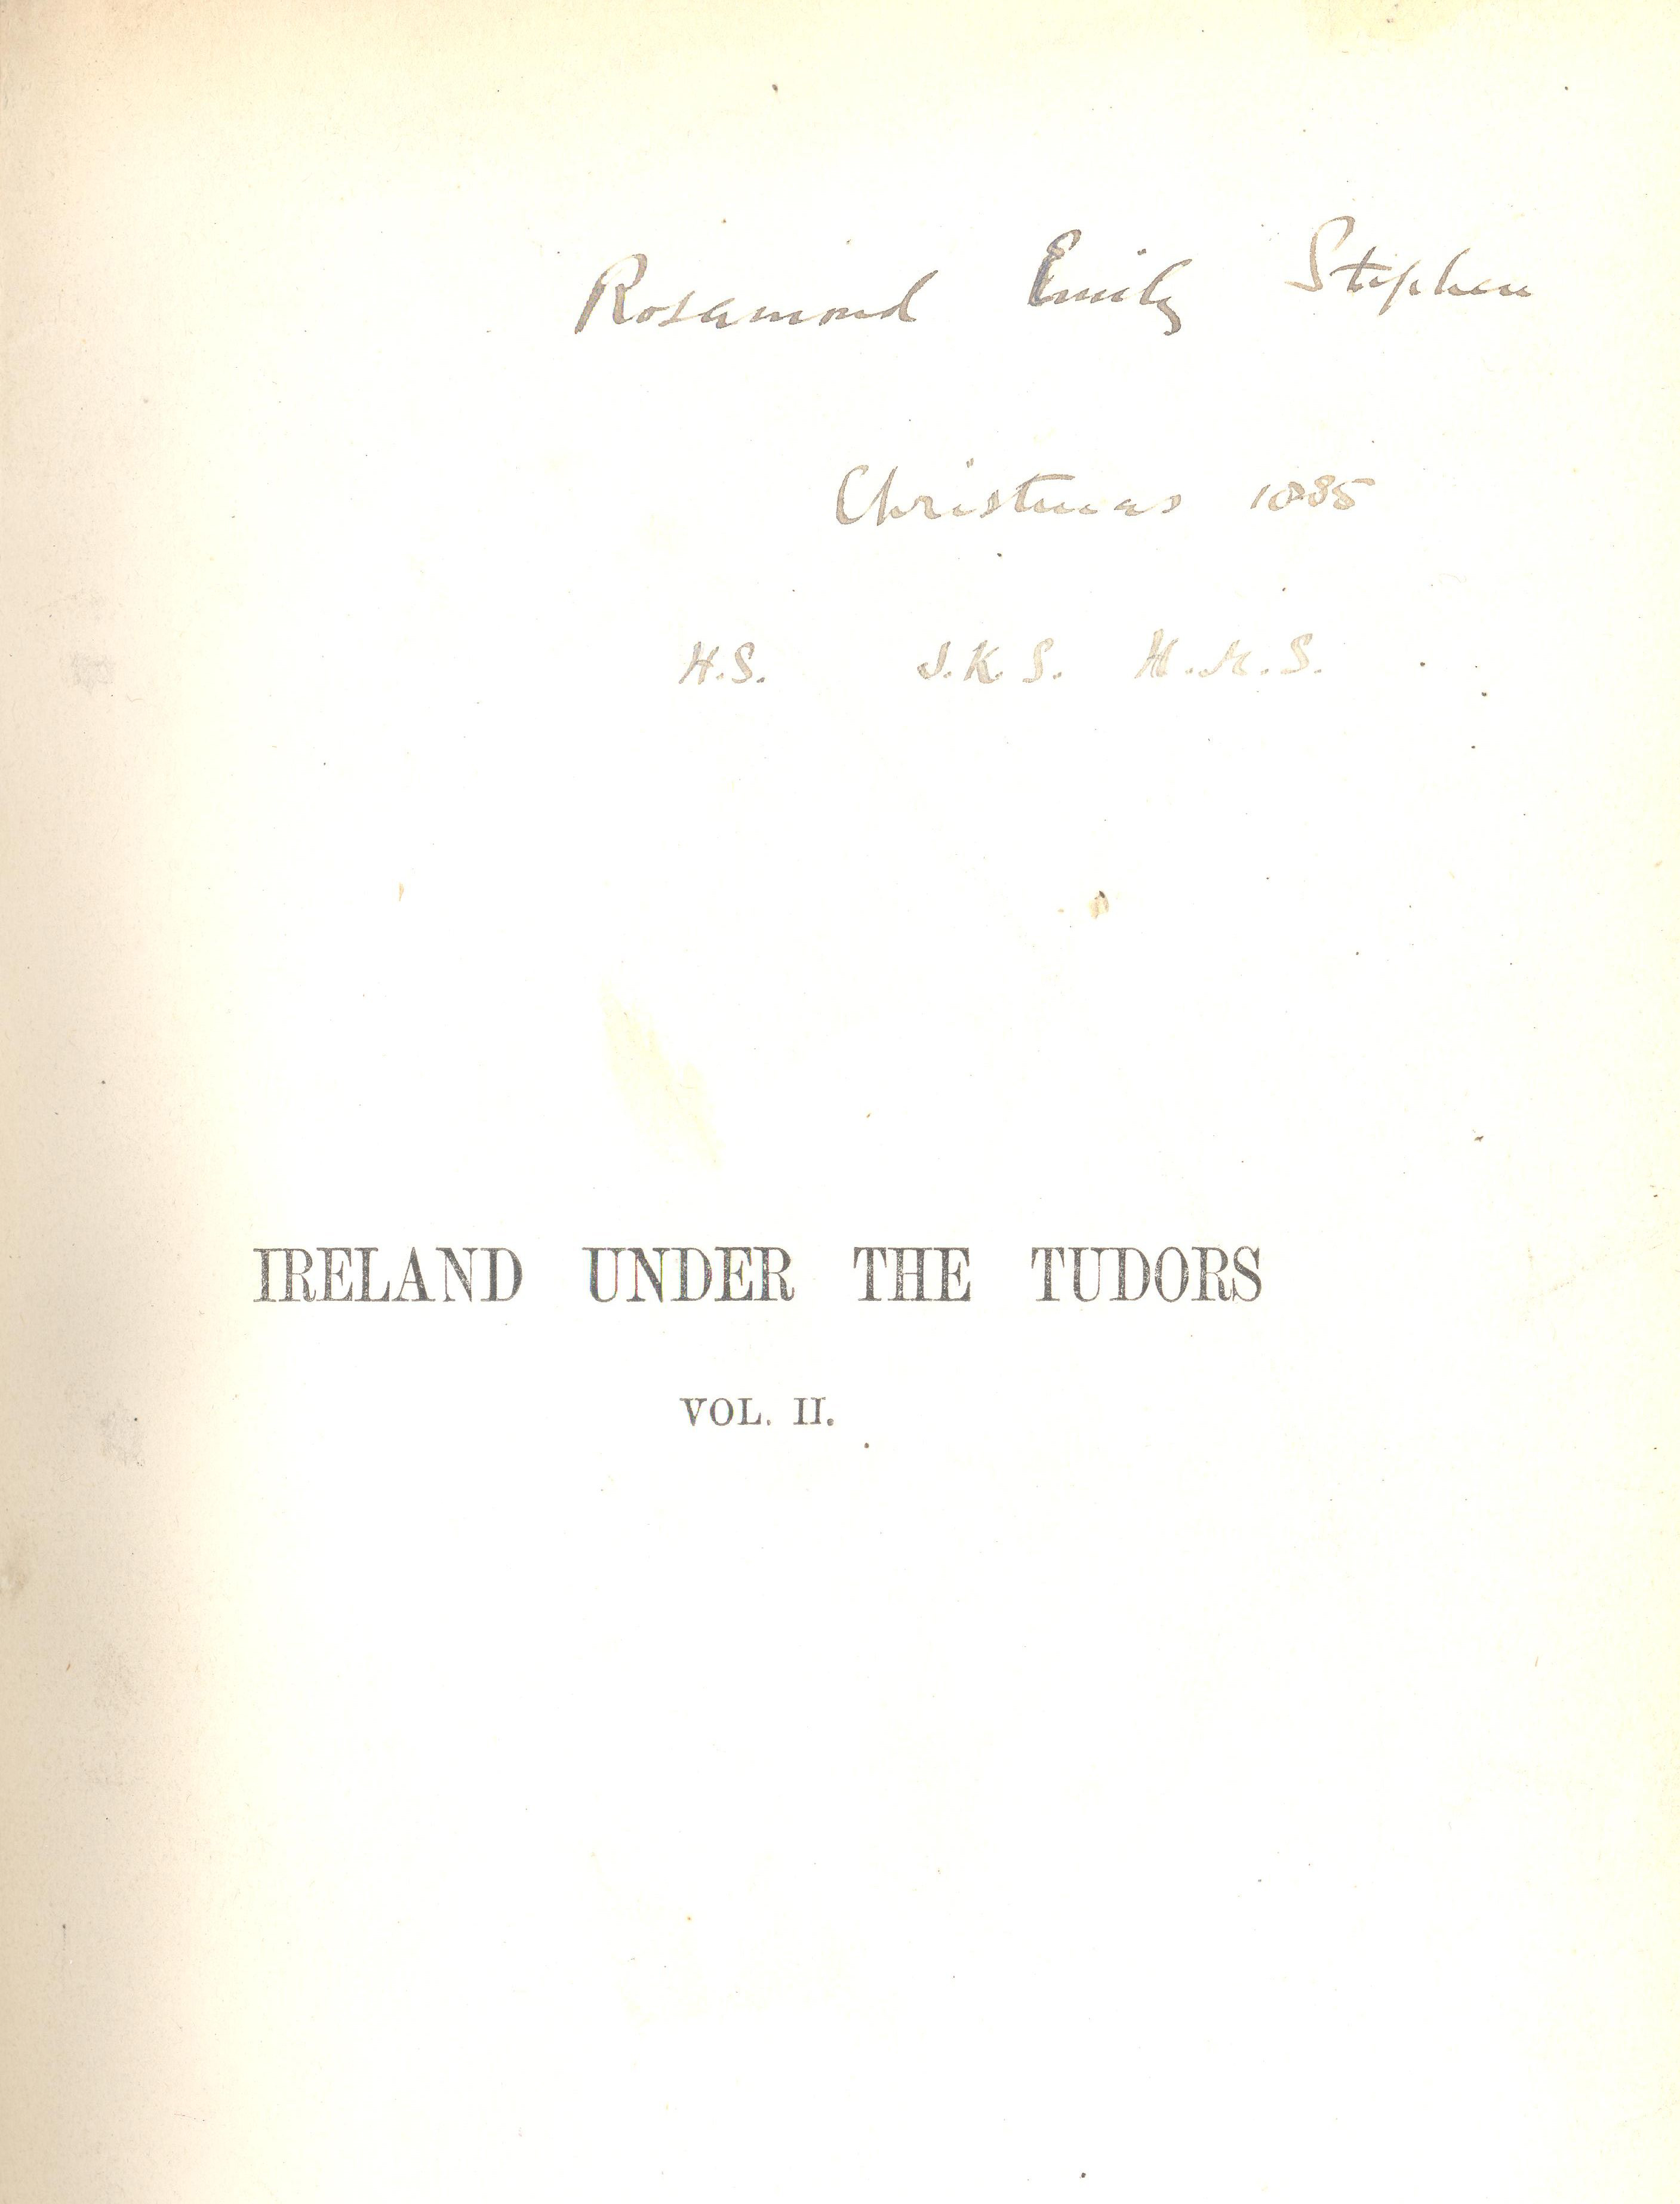 An image of the half title page of Rosamond Stephen's copy of the second volume of 'Ireland Under the Tudors with a Succinct Account of the Earlier History' by Richard Bagwell (London: Longmans, Green, and Co., 1885) signed by Stephen and dated Christmas 1885. This book is available to view in the RCB Library.